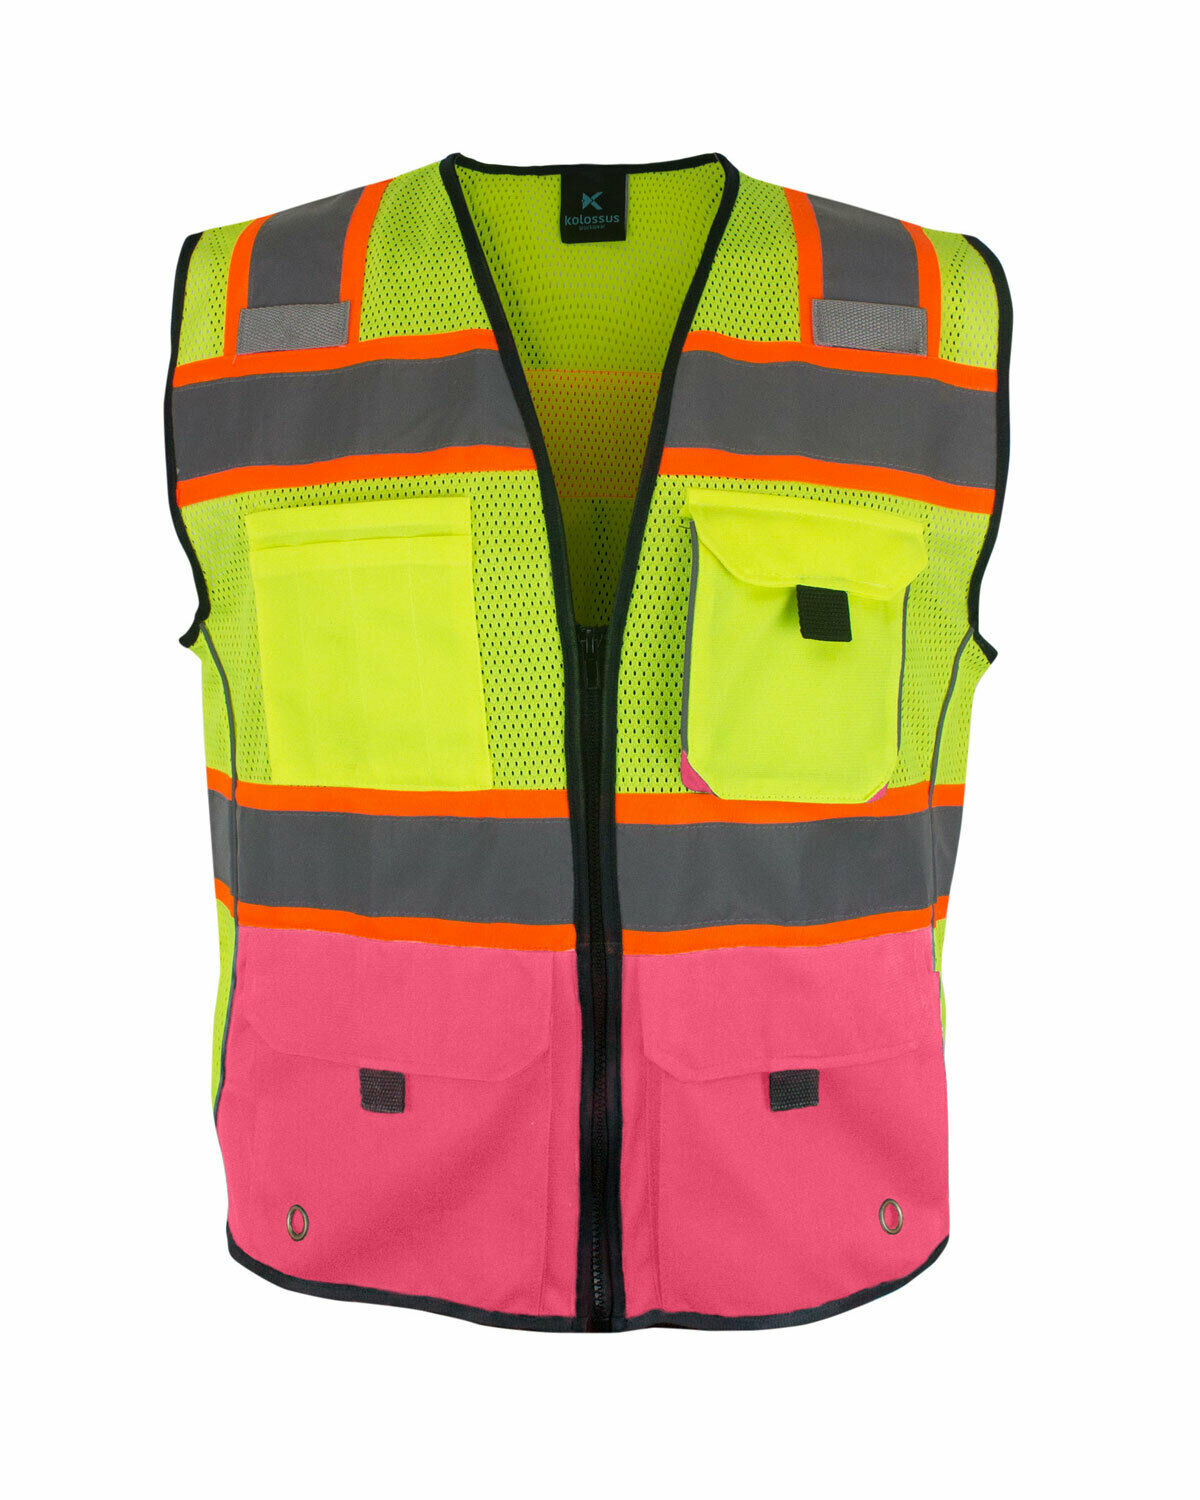 Women's Reflective Safety Vest With Pockets Yellow-pink